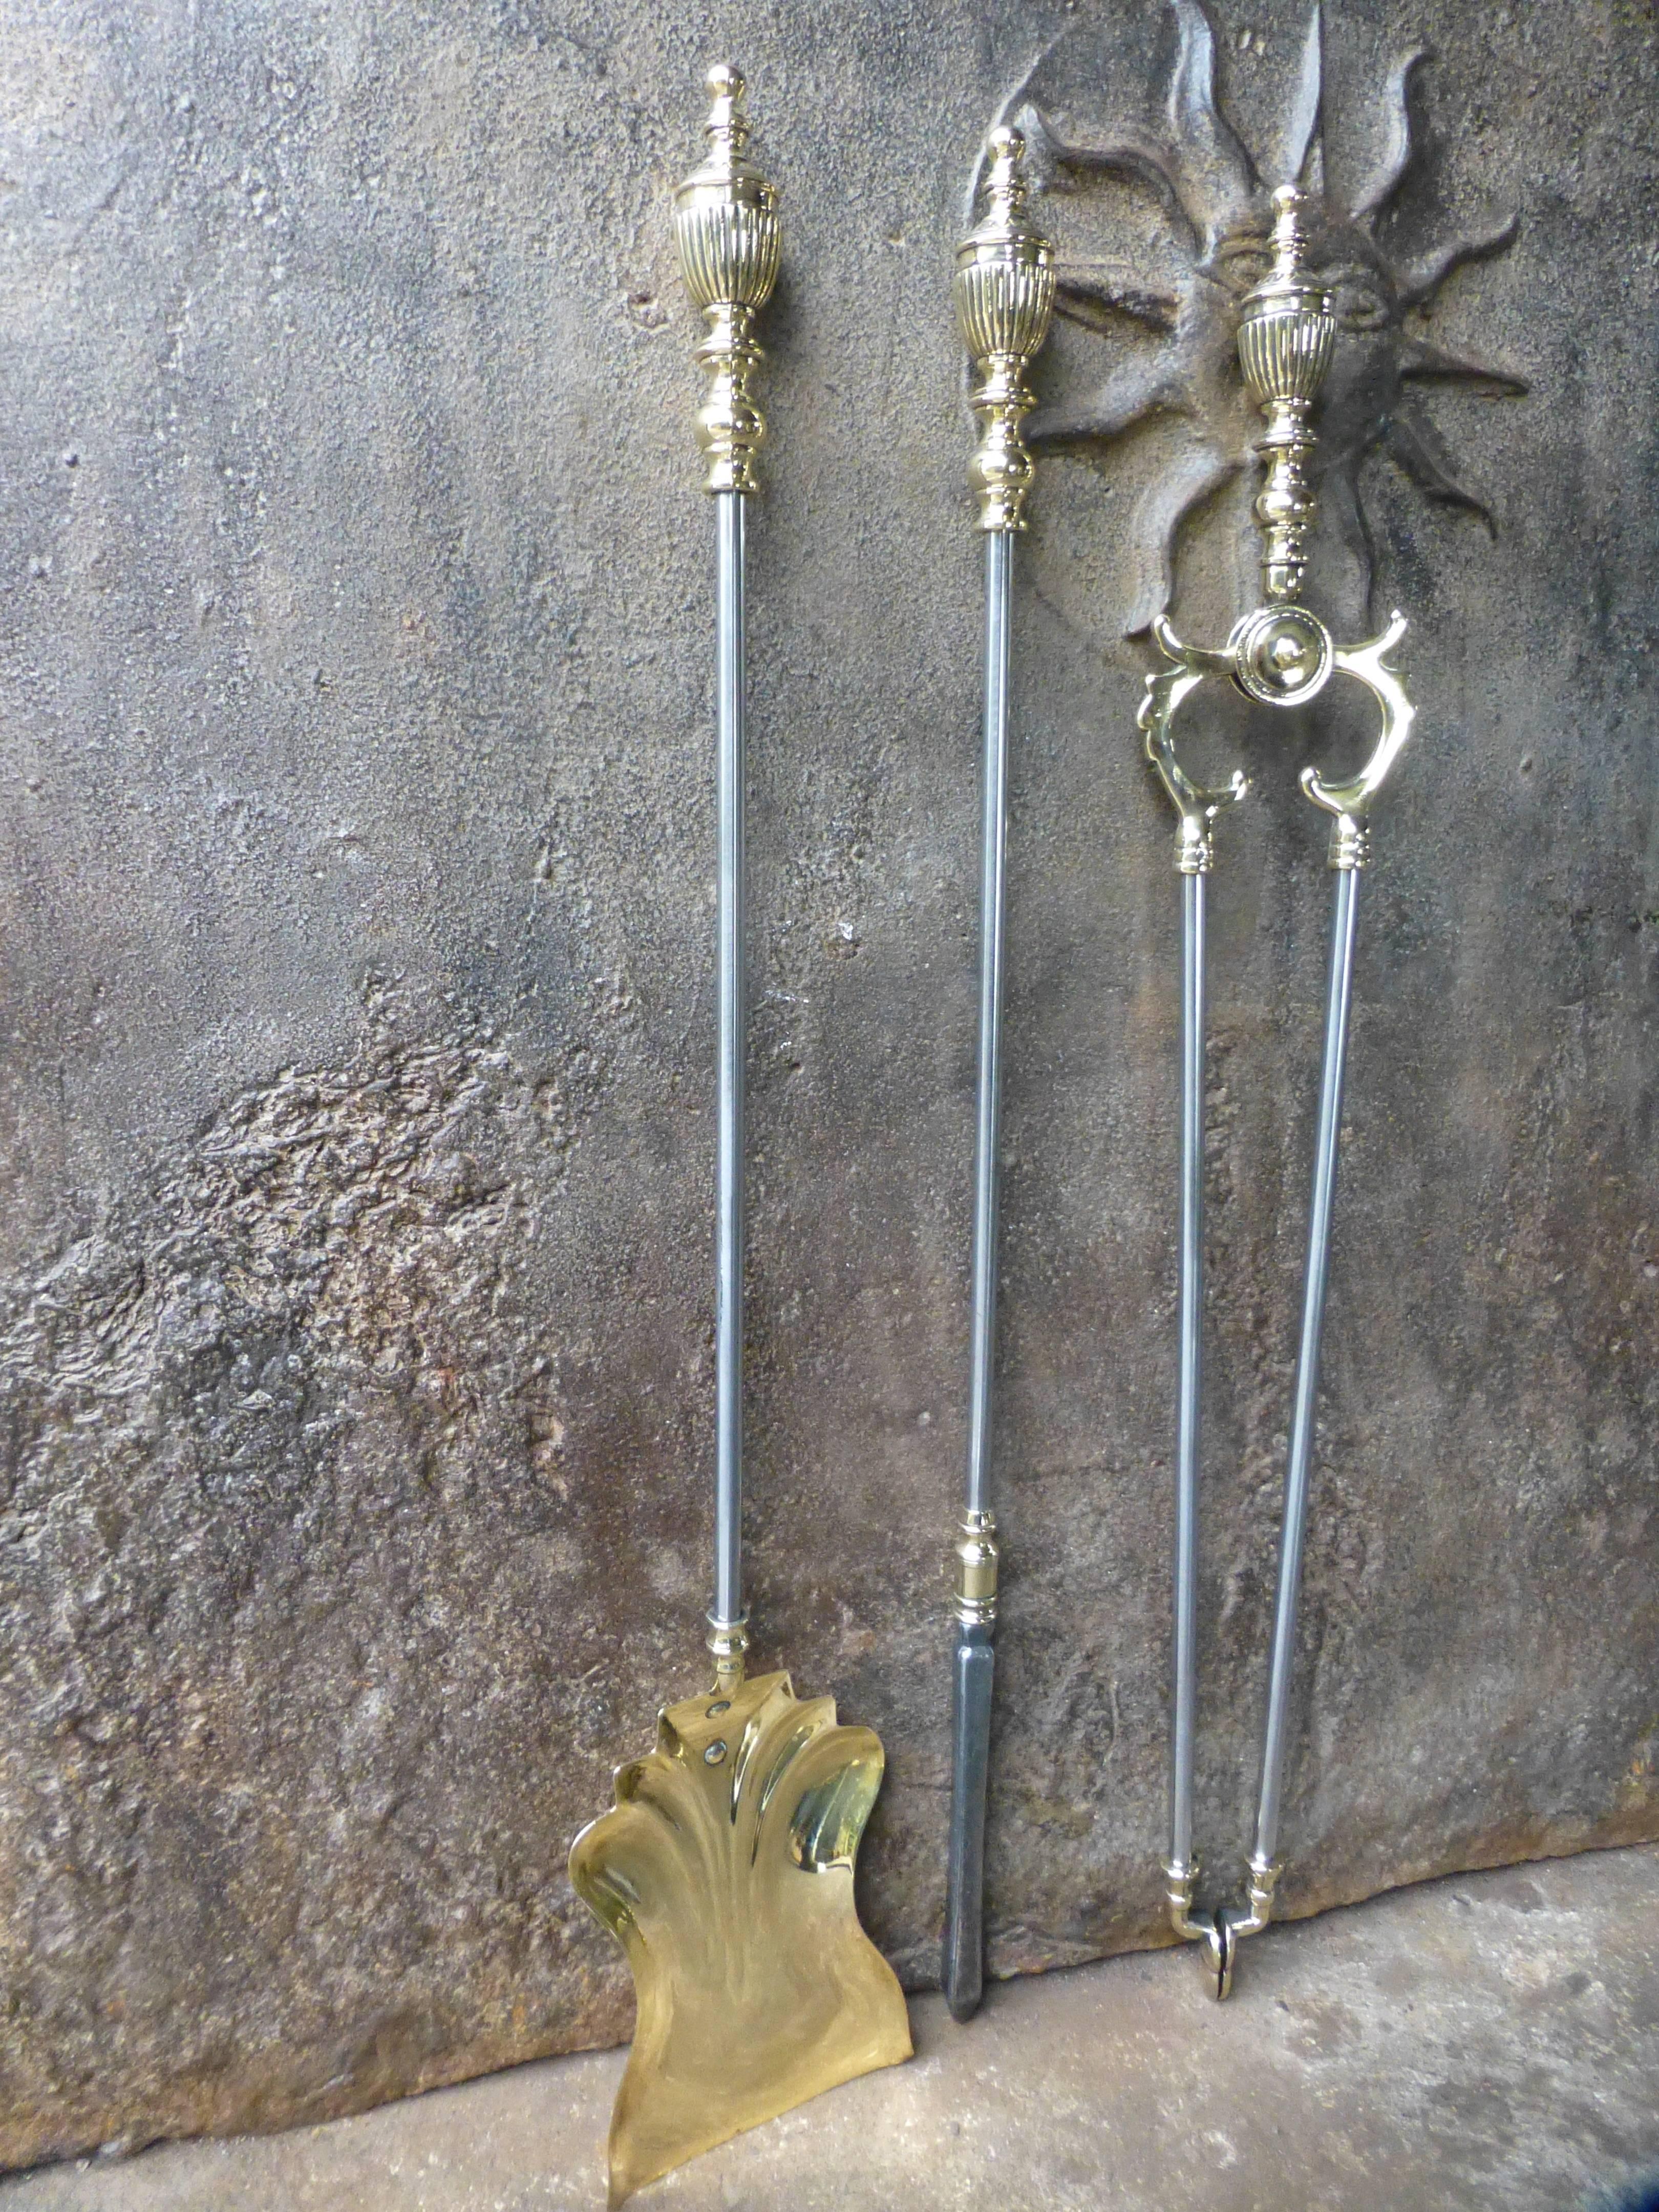 19th century English fireplace tools - fire irons made of polished steel with brass handles and other details. Victorian period. The fireplace toolset is in a good condition.

